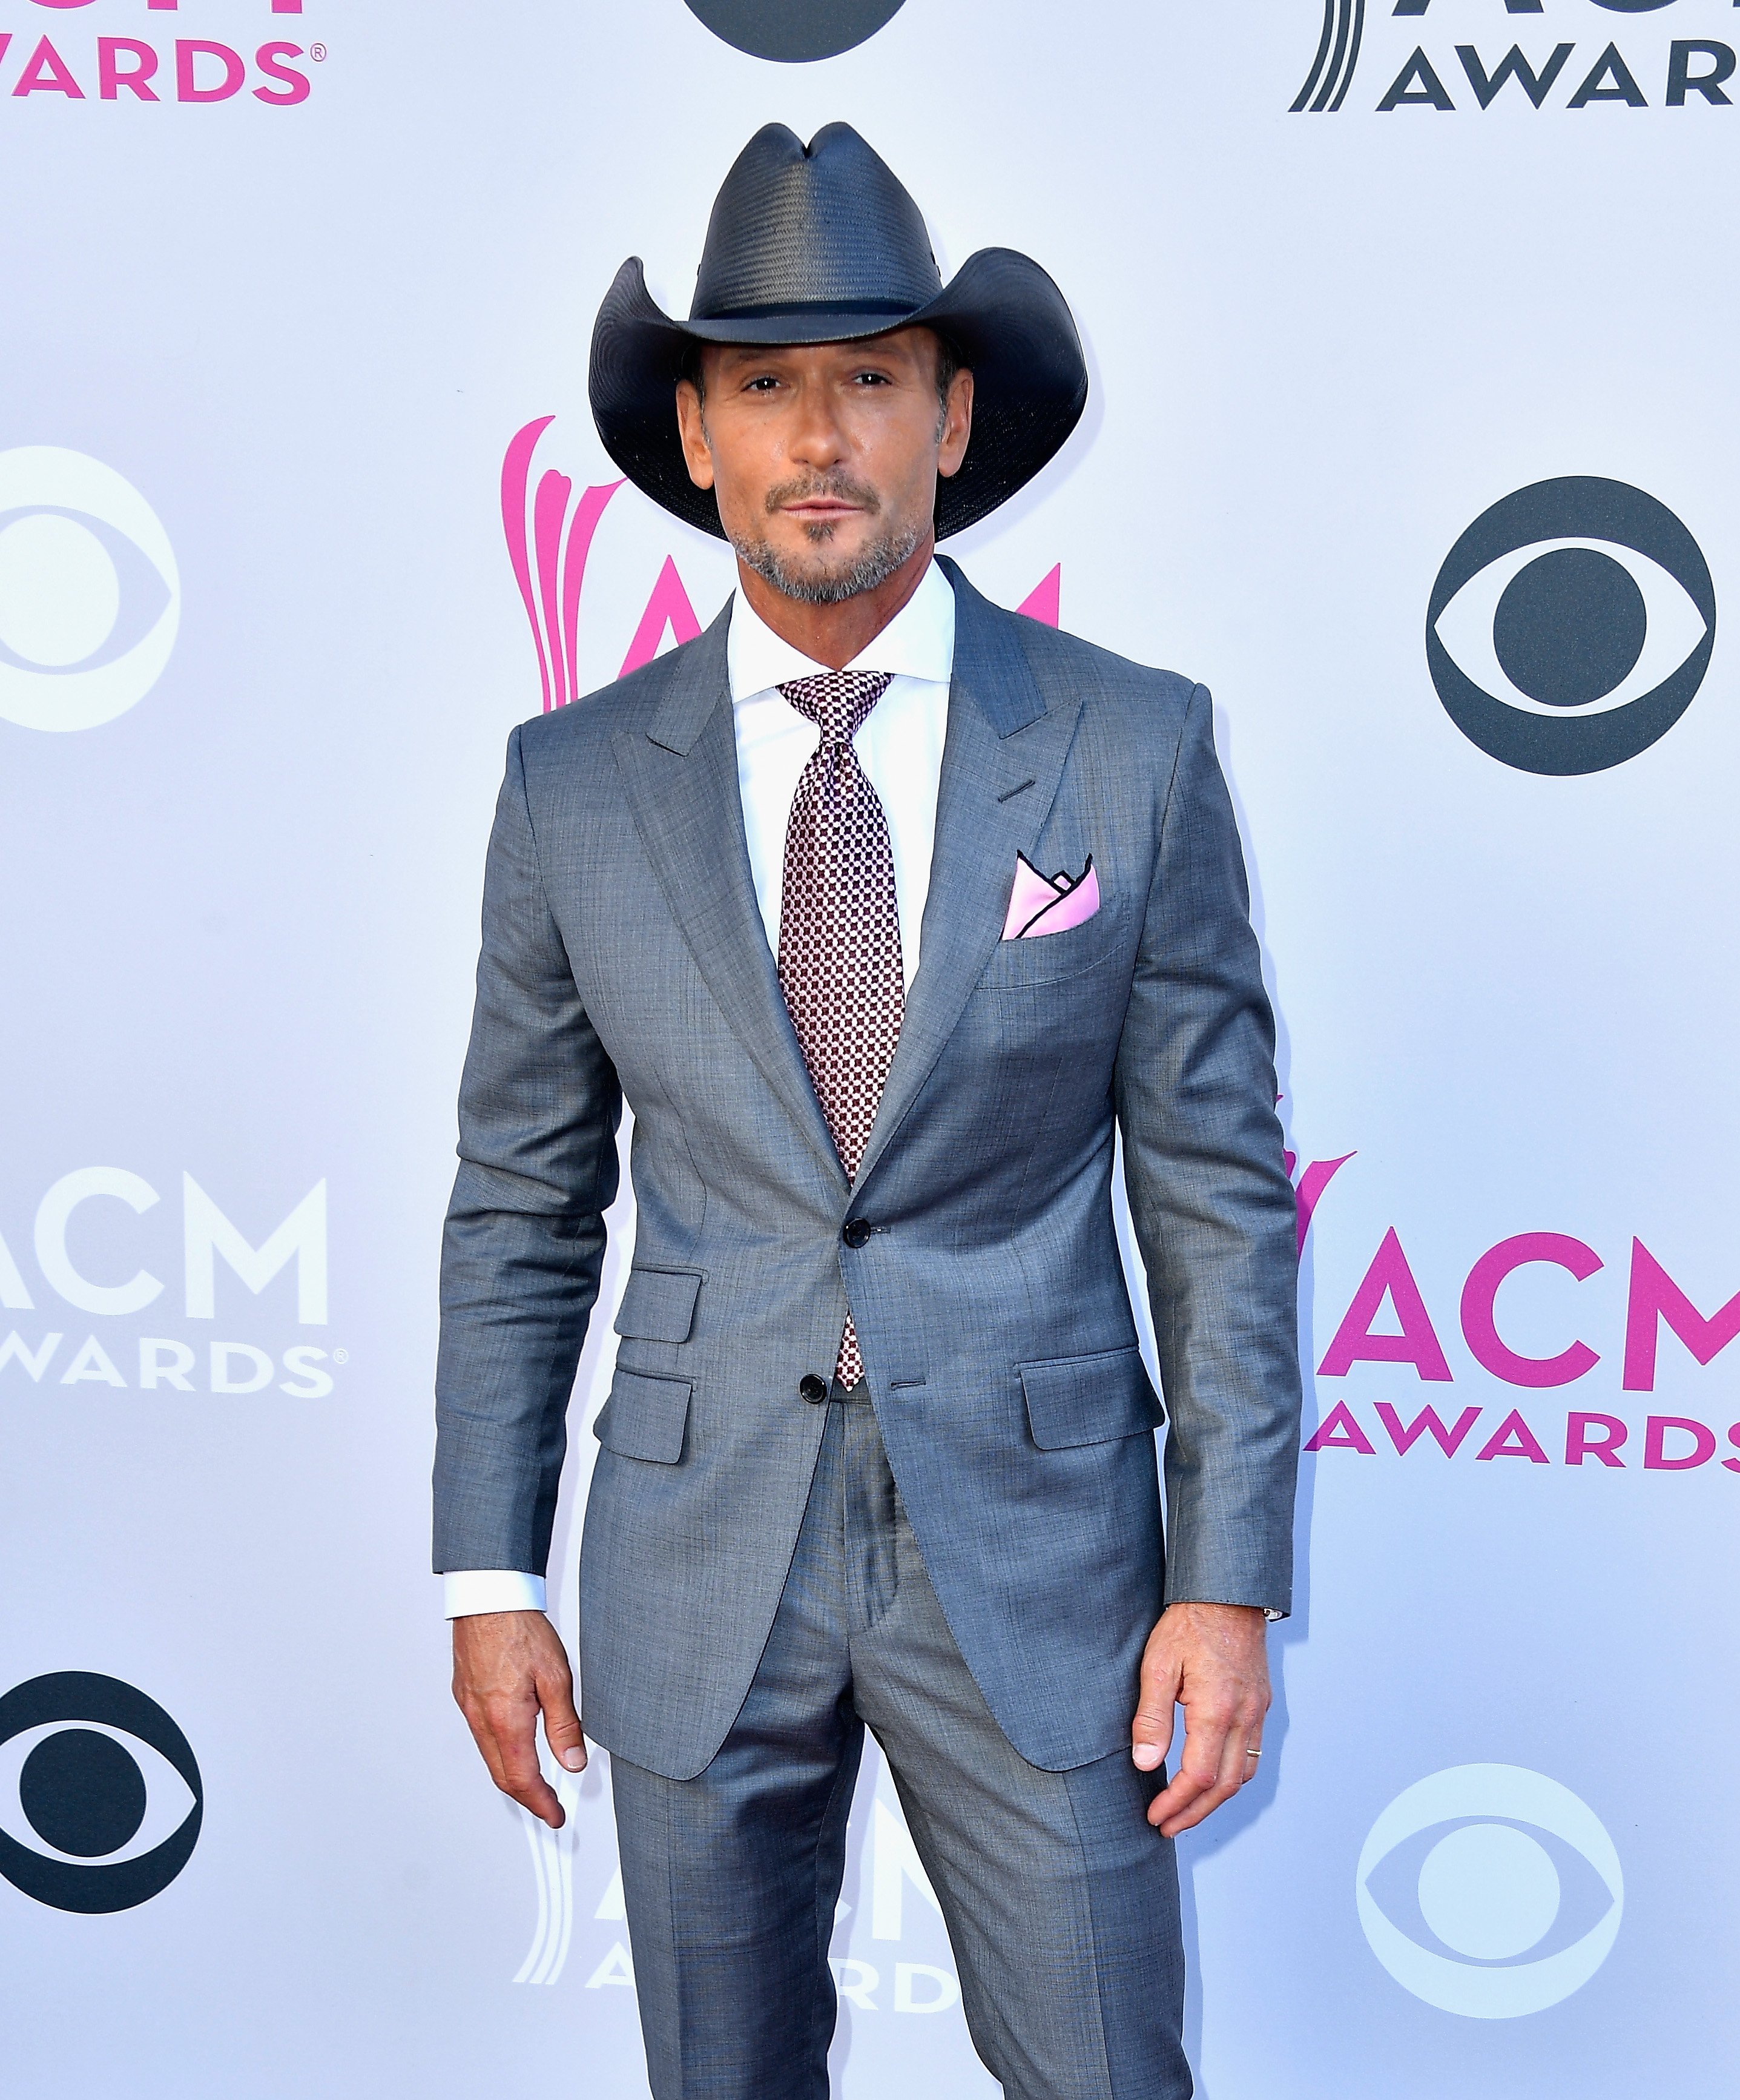 Tim McGraw at the 52nd Academy Of Country Music Awards on April 2, 2017 | Photo : Getty Images.